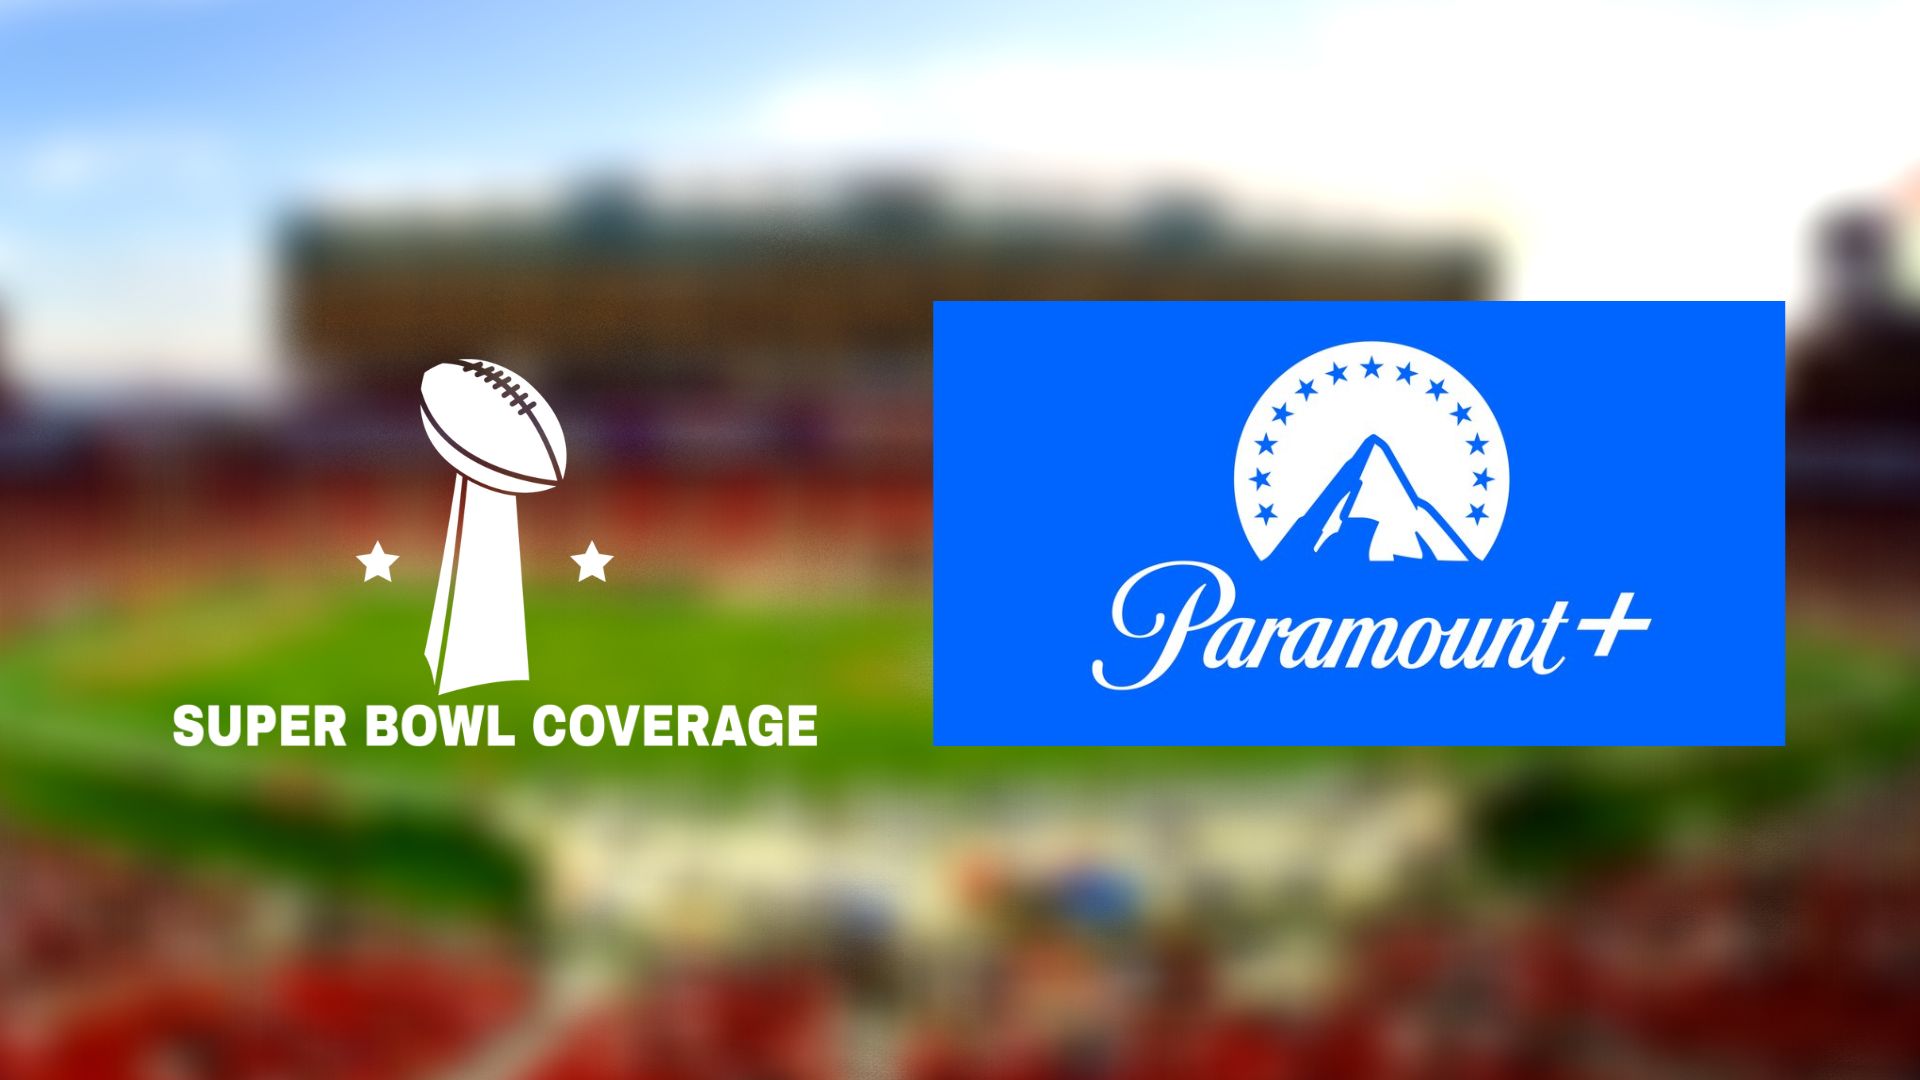 How to Watch Super Bowl on Paramount+